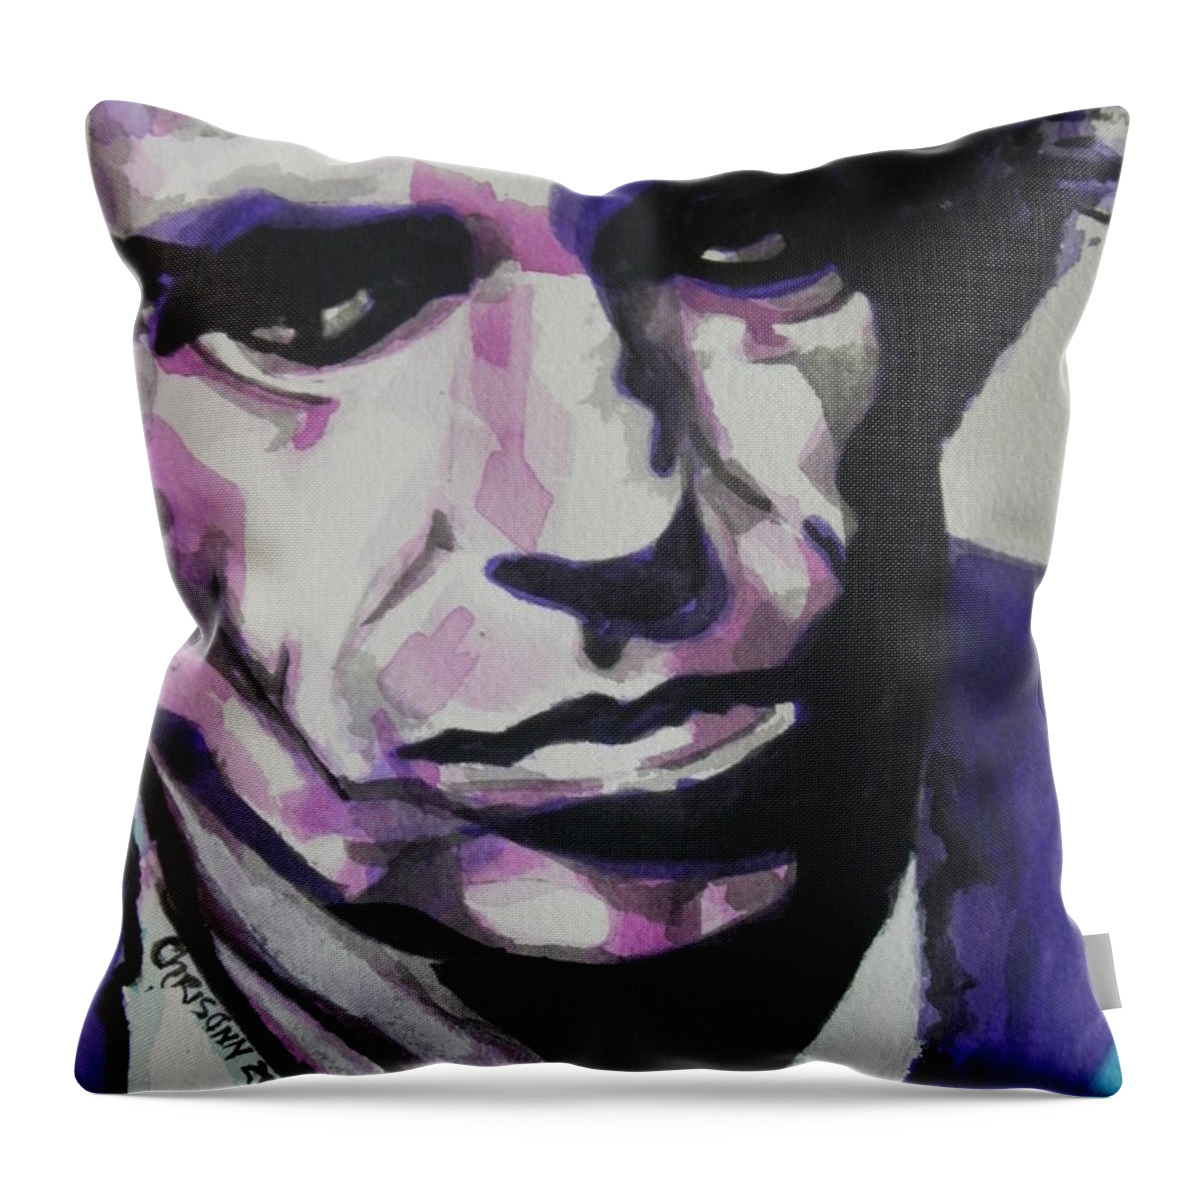 Watercolor Painting Throw Pillow featuring the painting Keith Richards by Chrisann Ellis